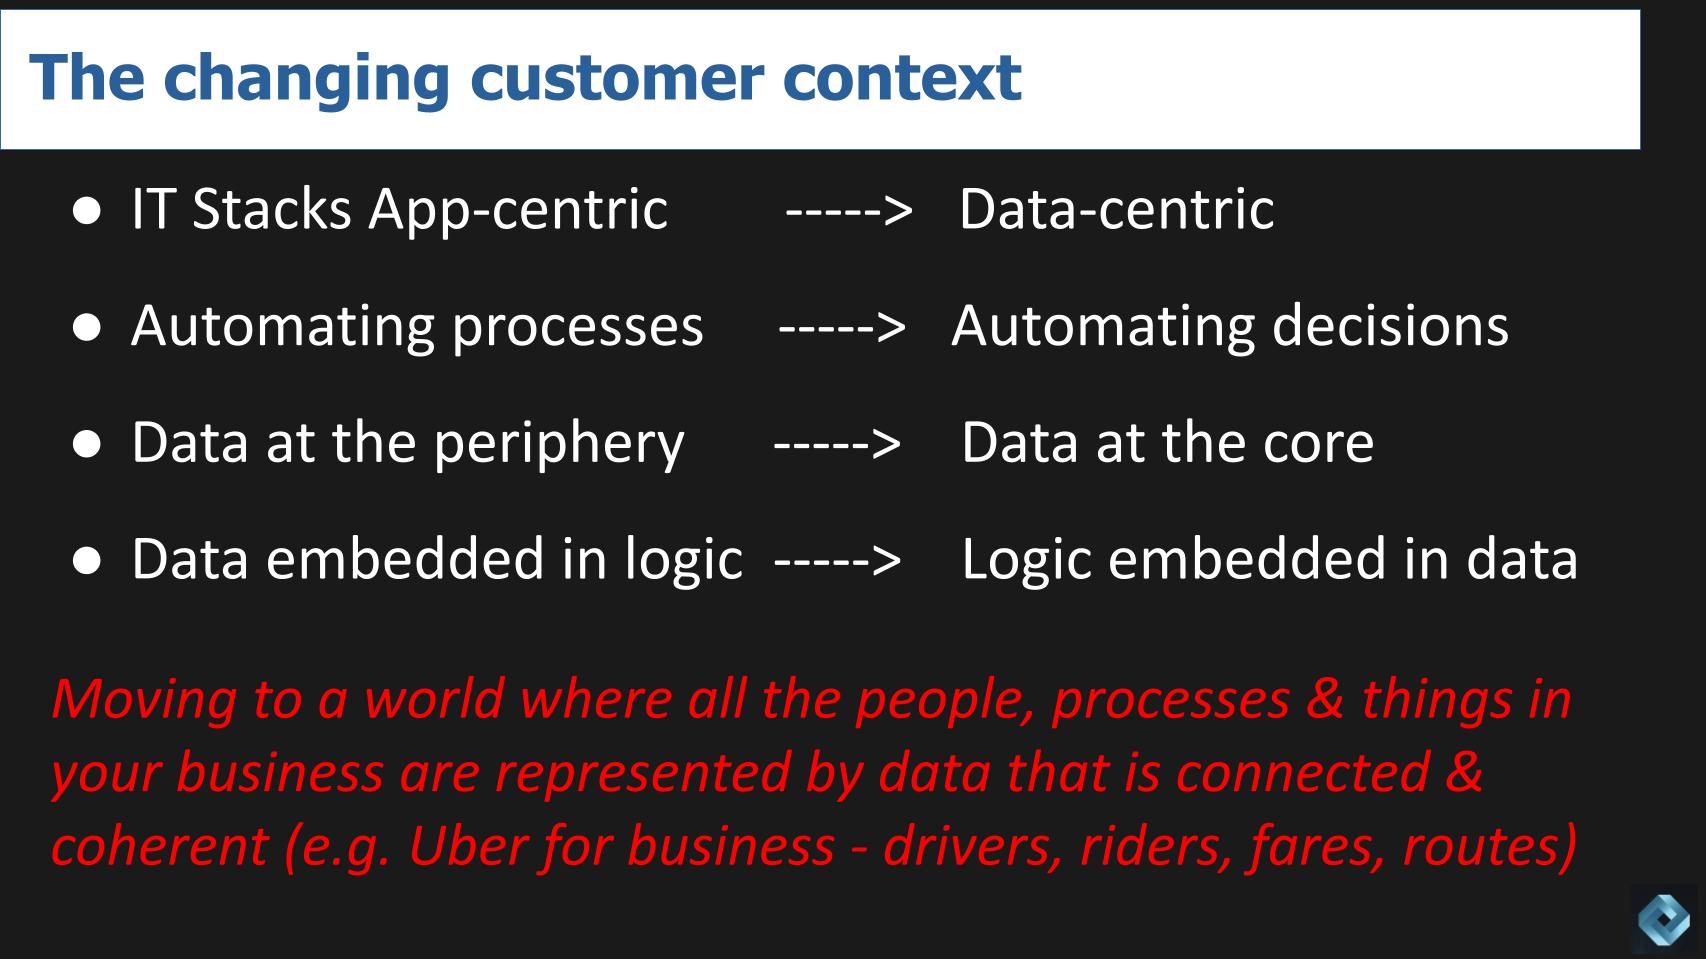 The changing customer context - for example, Automating processes to automating decisions